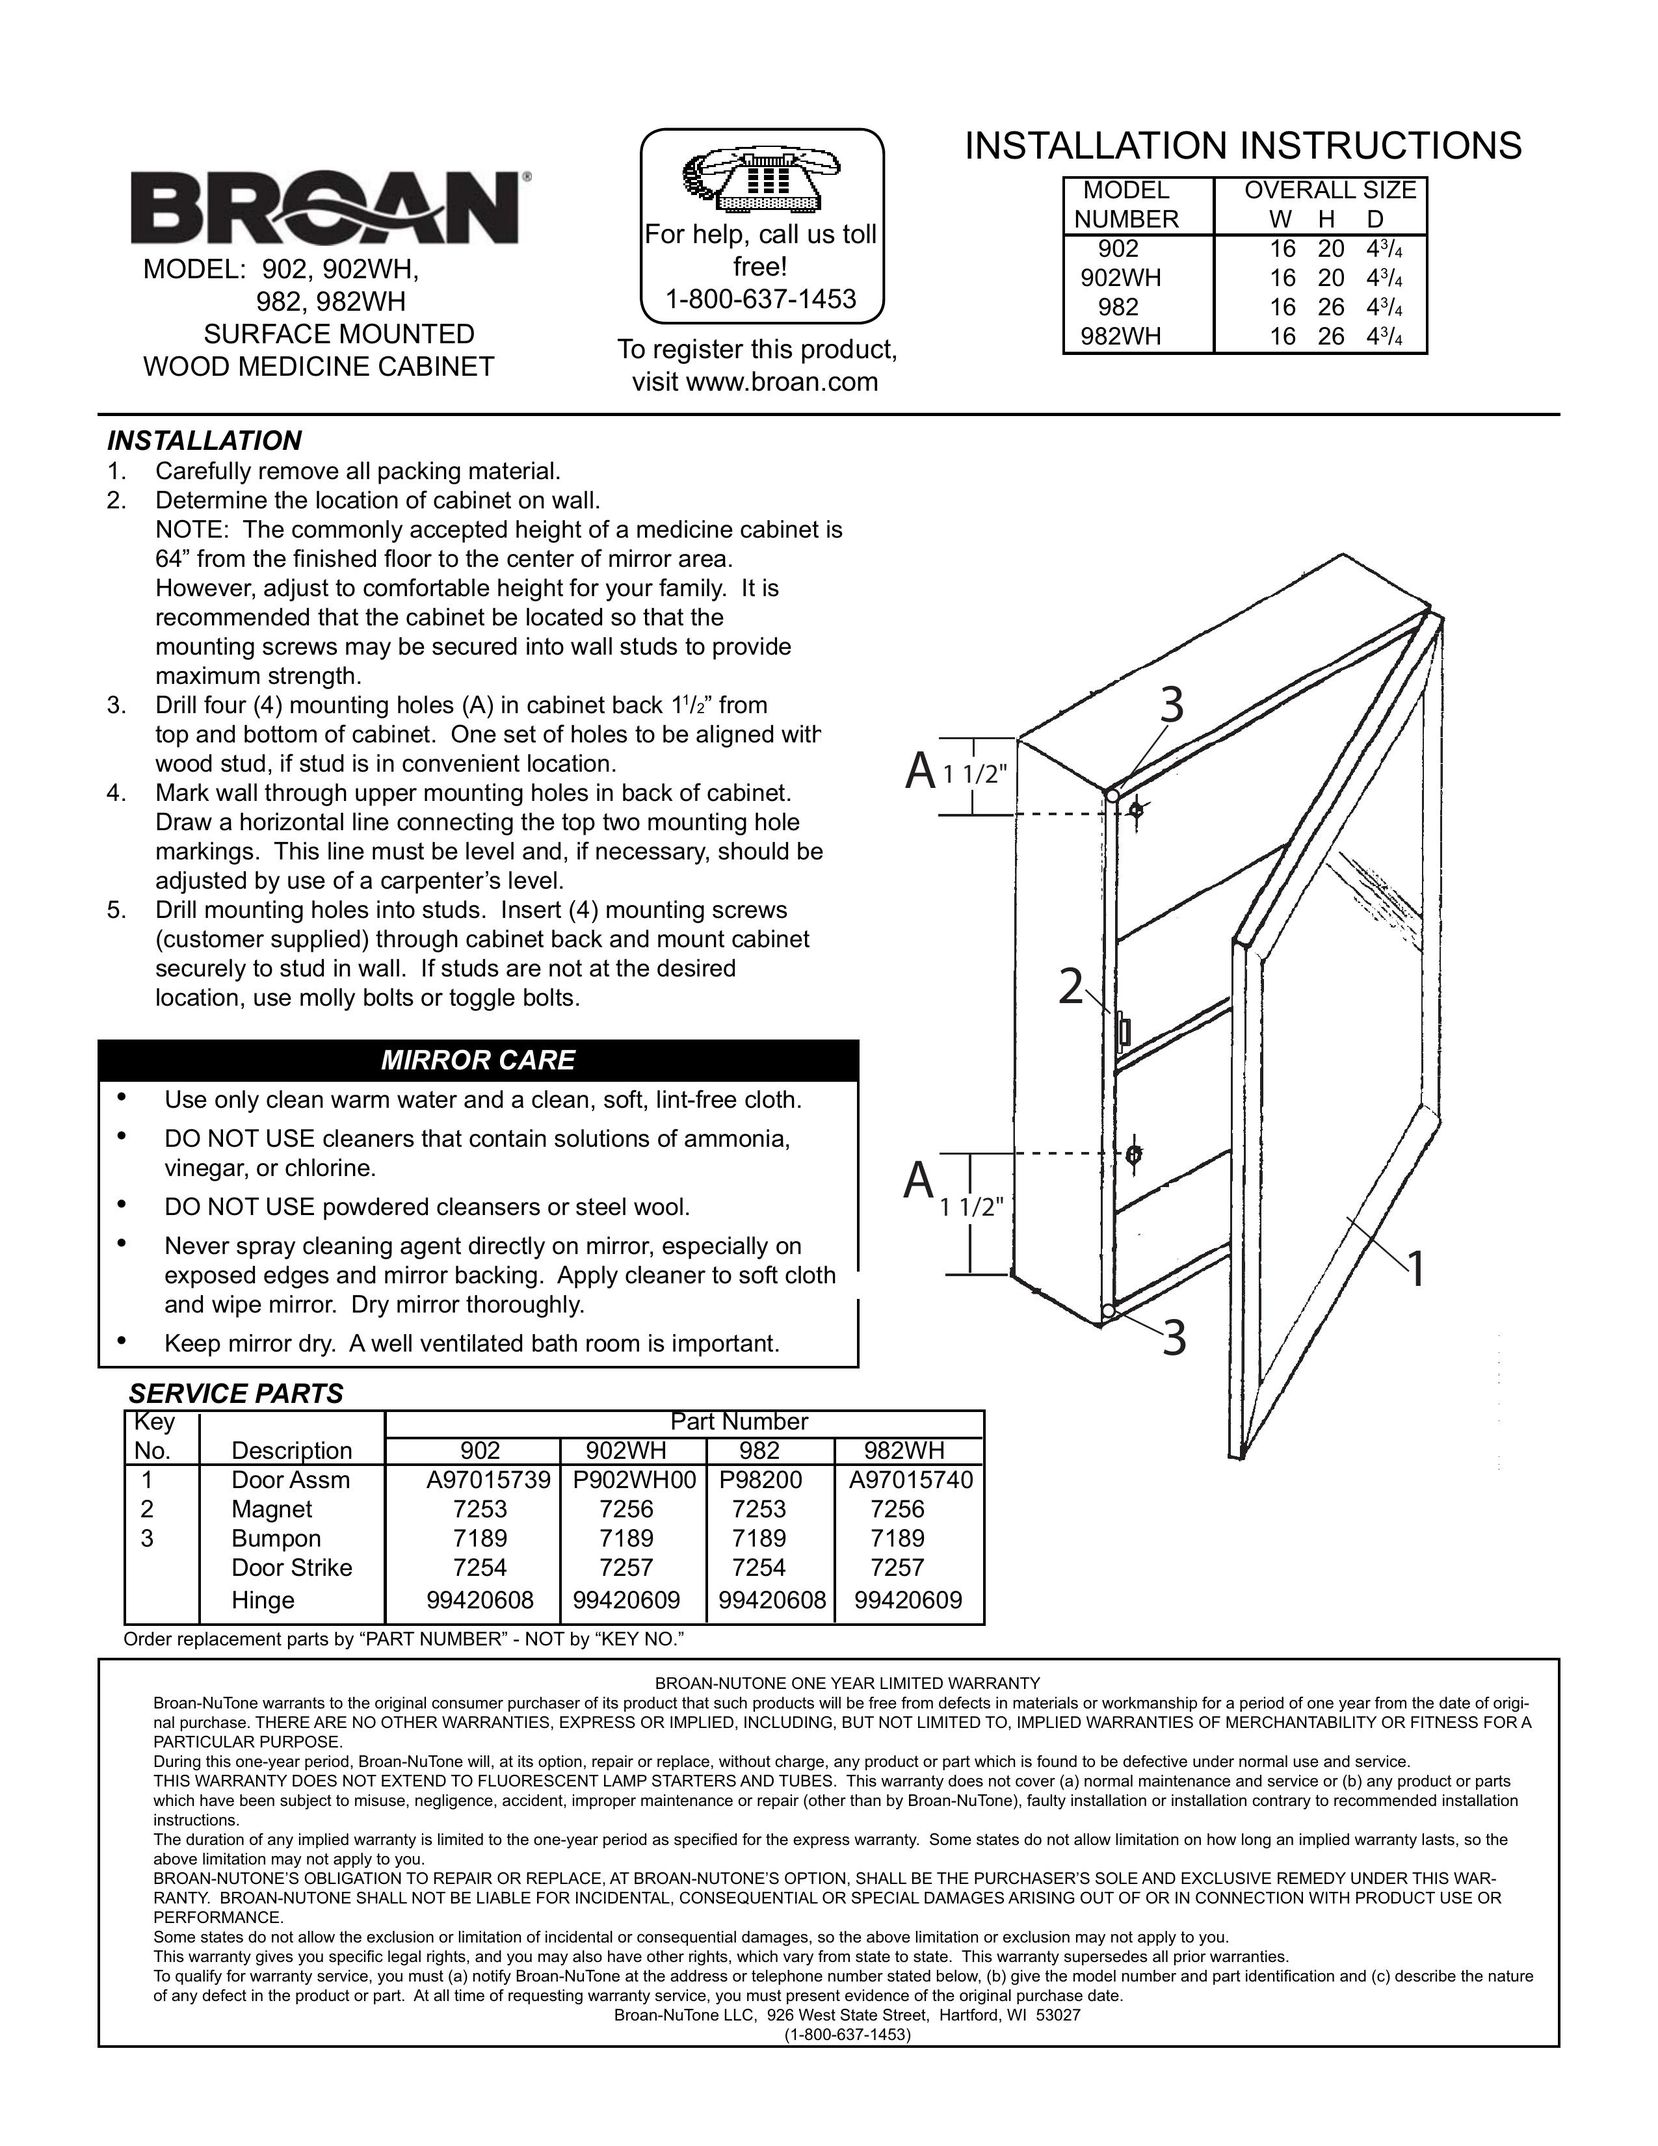 Broan 902WH Kitchen Entertainment Center User Manual